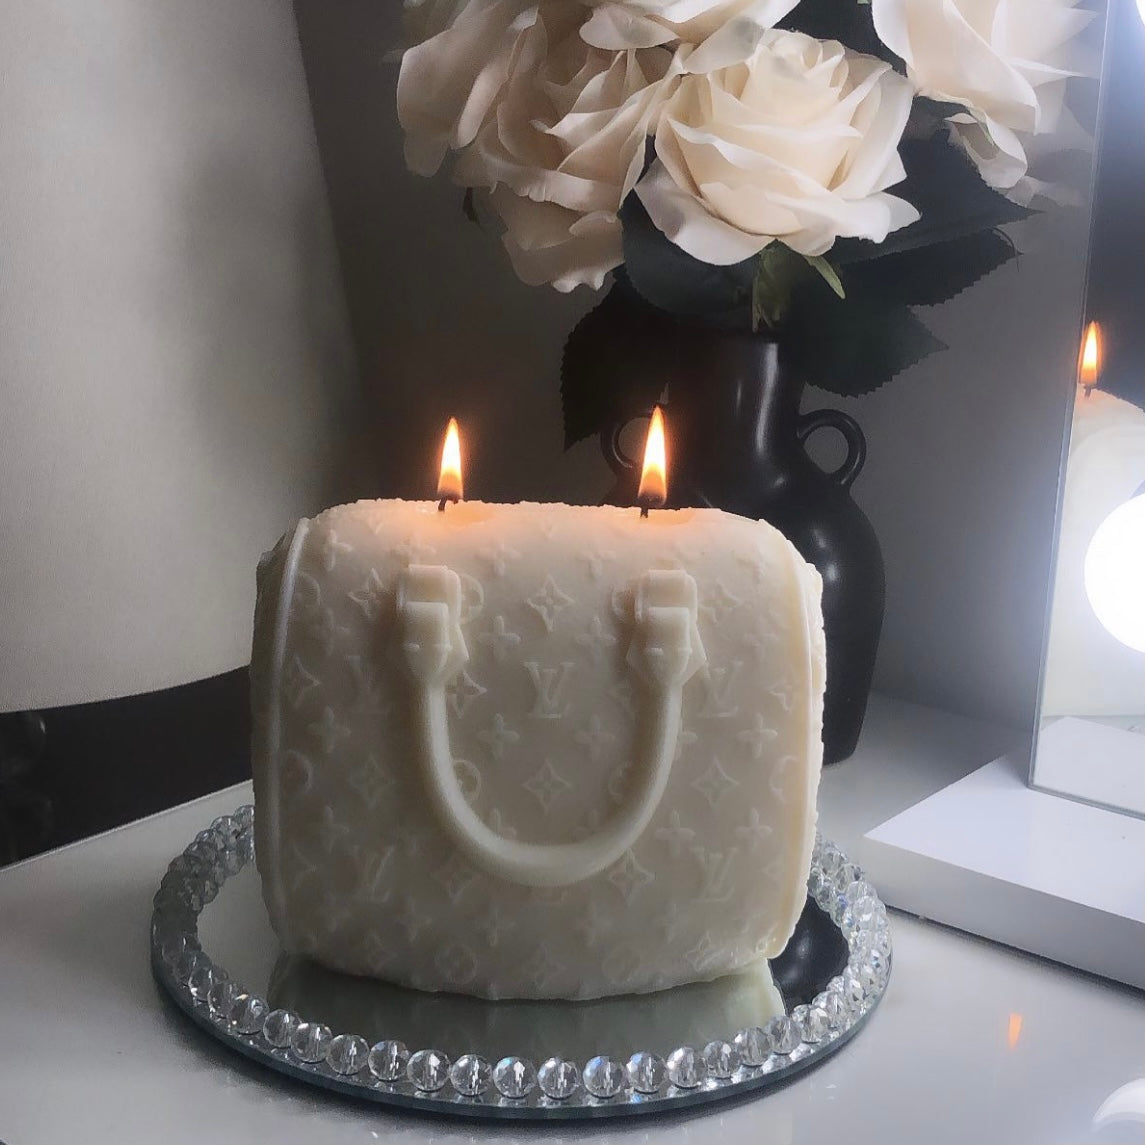 Louis Vuitton Inspired Rose Gold Candle - Just In - Classy Wick